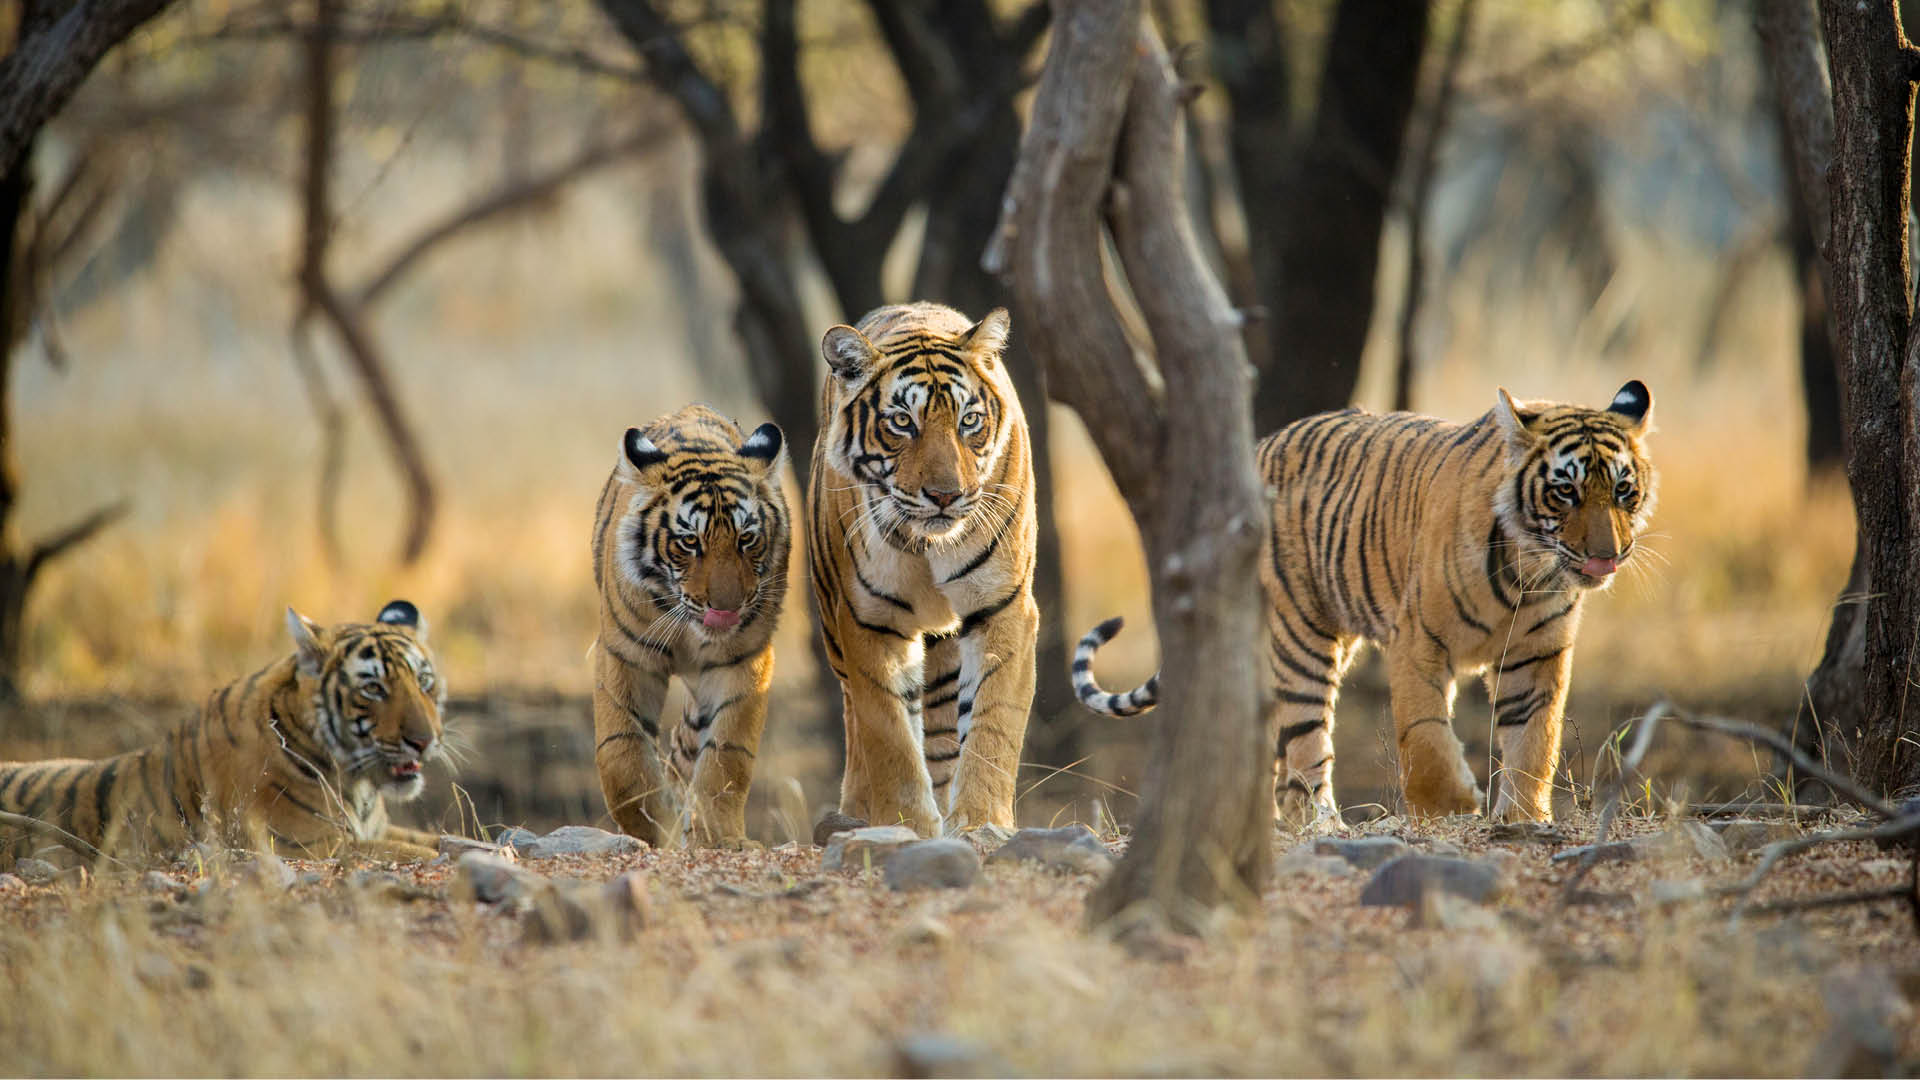 Shockingly, 26 Tigers Are Missing From Ranthambore National park